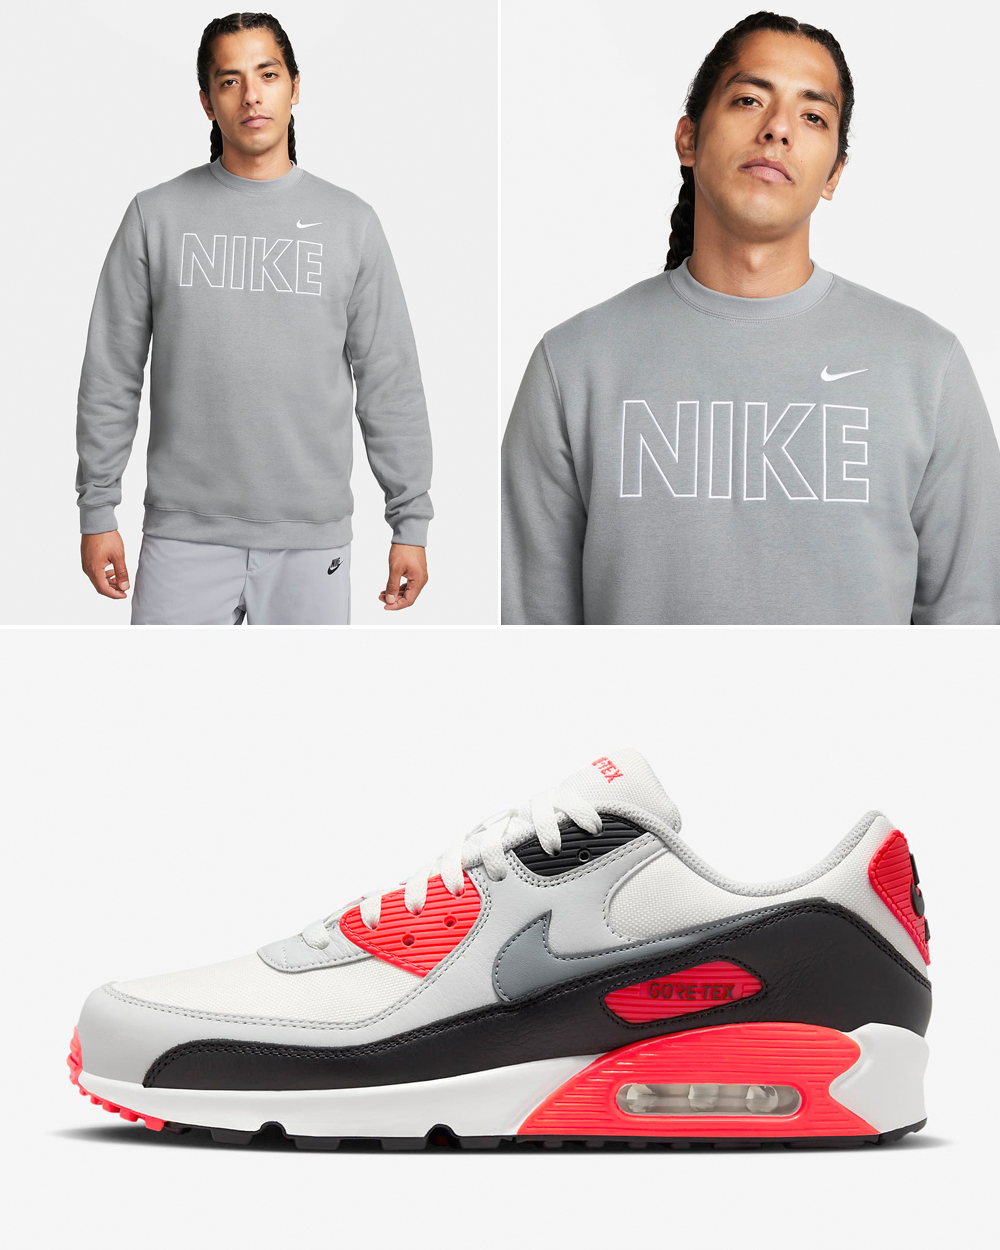 Nike Air Max 90 Gore Tex Infrared Sweatshirt Matching Outfit